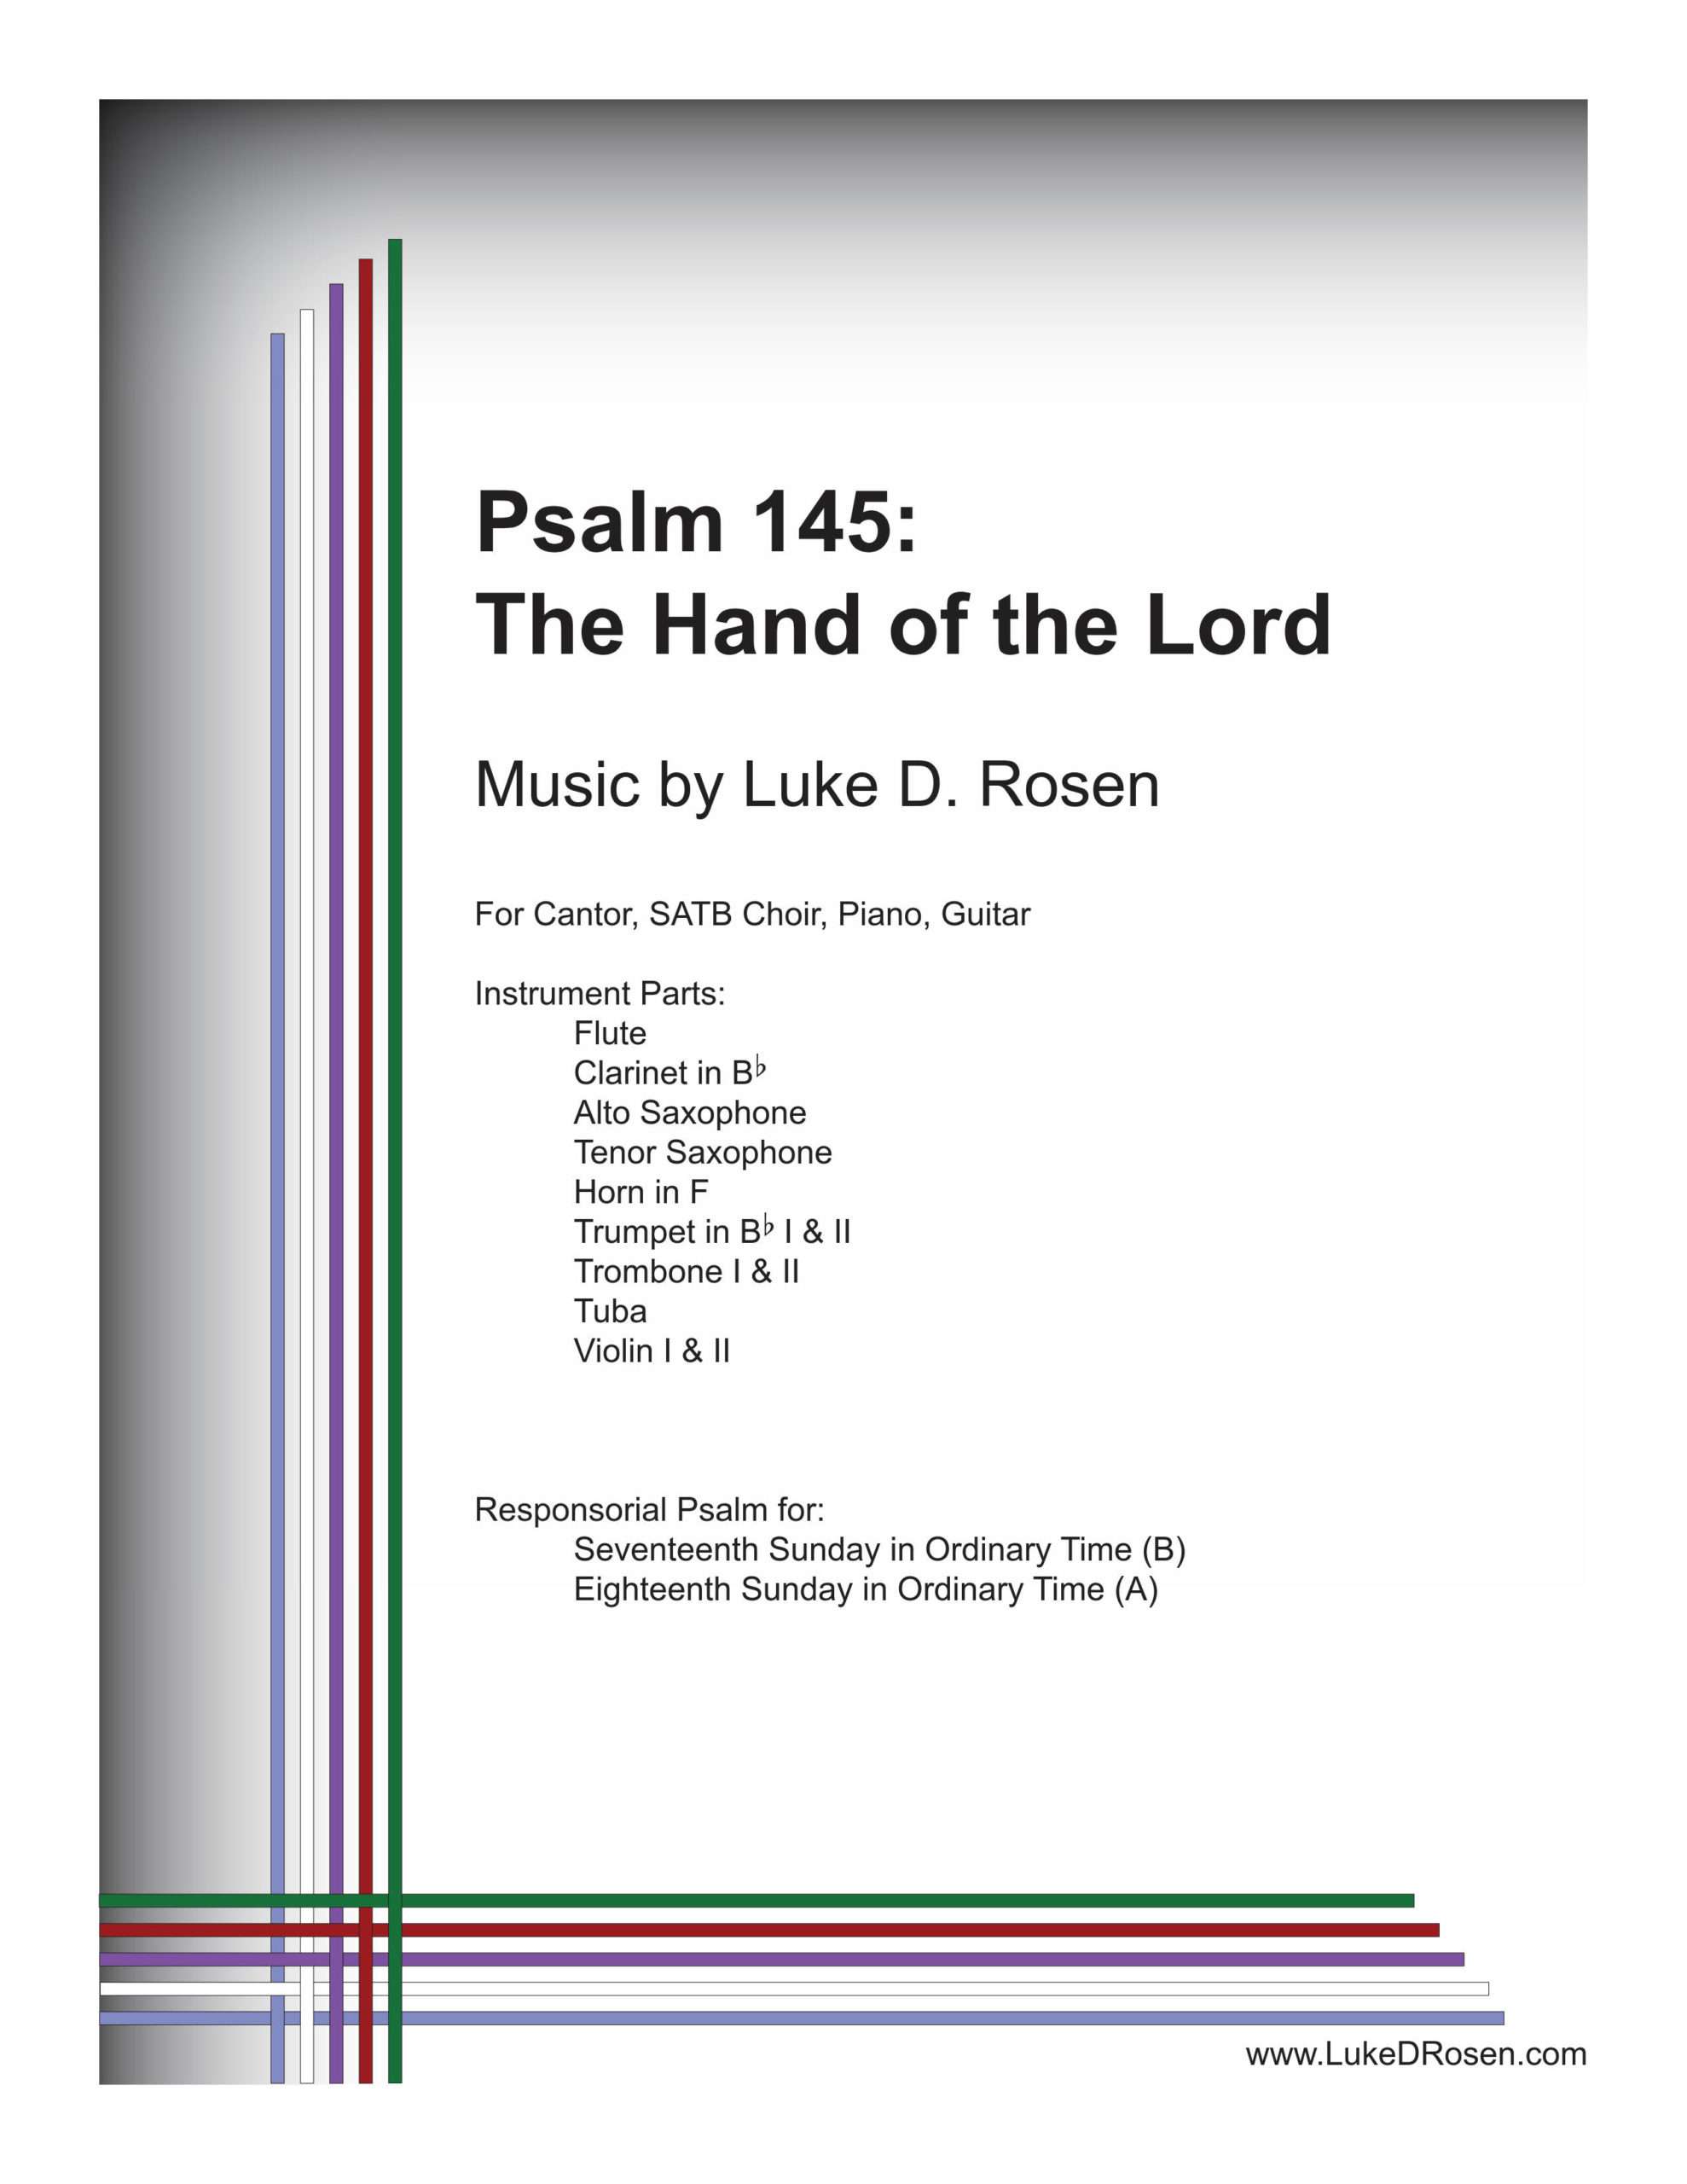 Psalm 145 – The Hand of the Lord (Rosen)